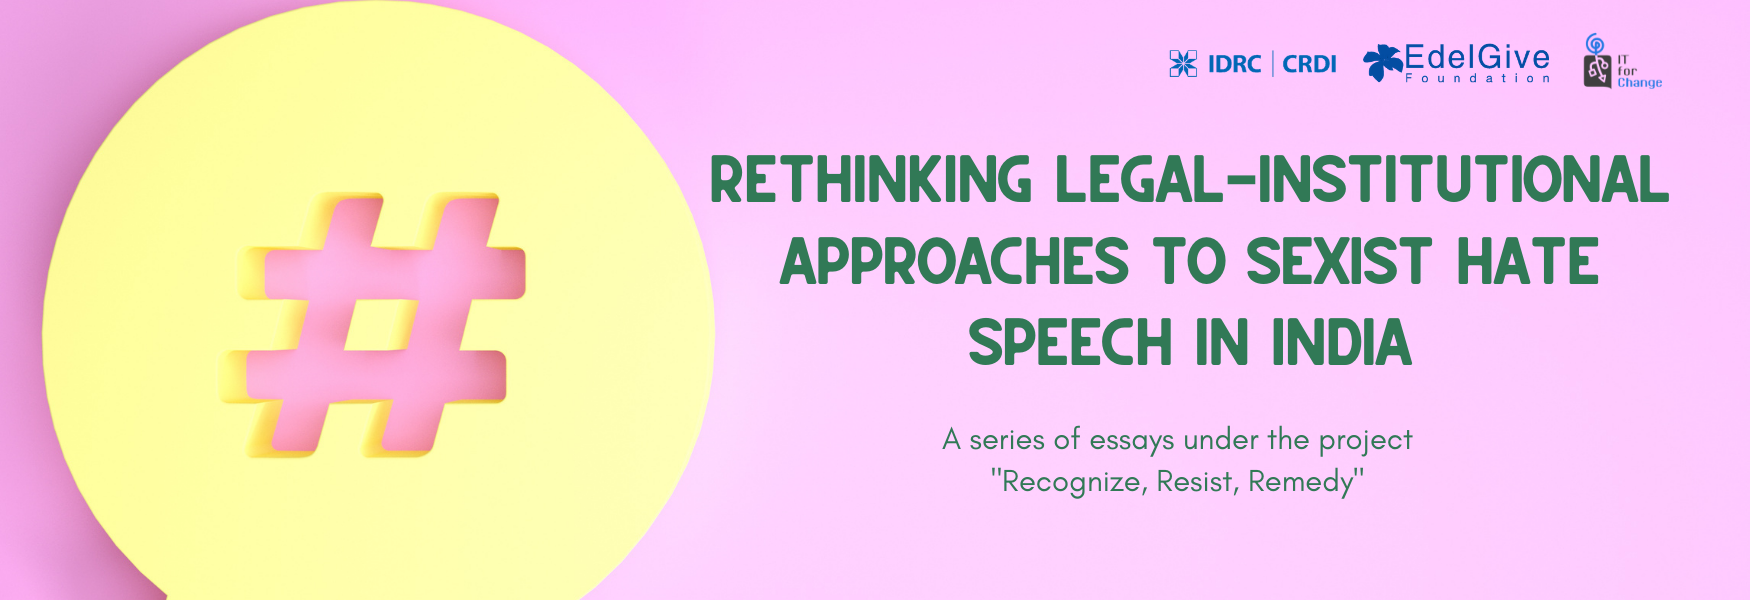 rethinking legal-institutional approaches to sexist hate speech in India